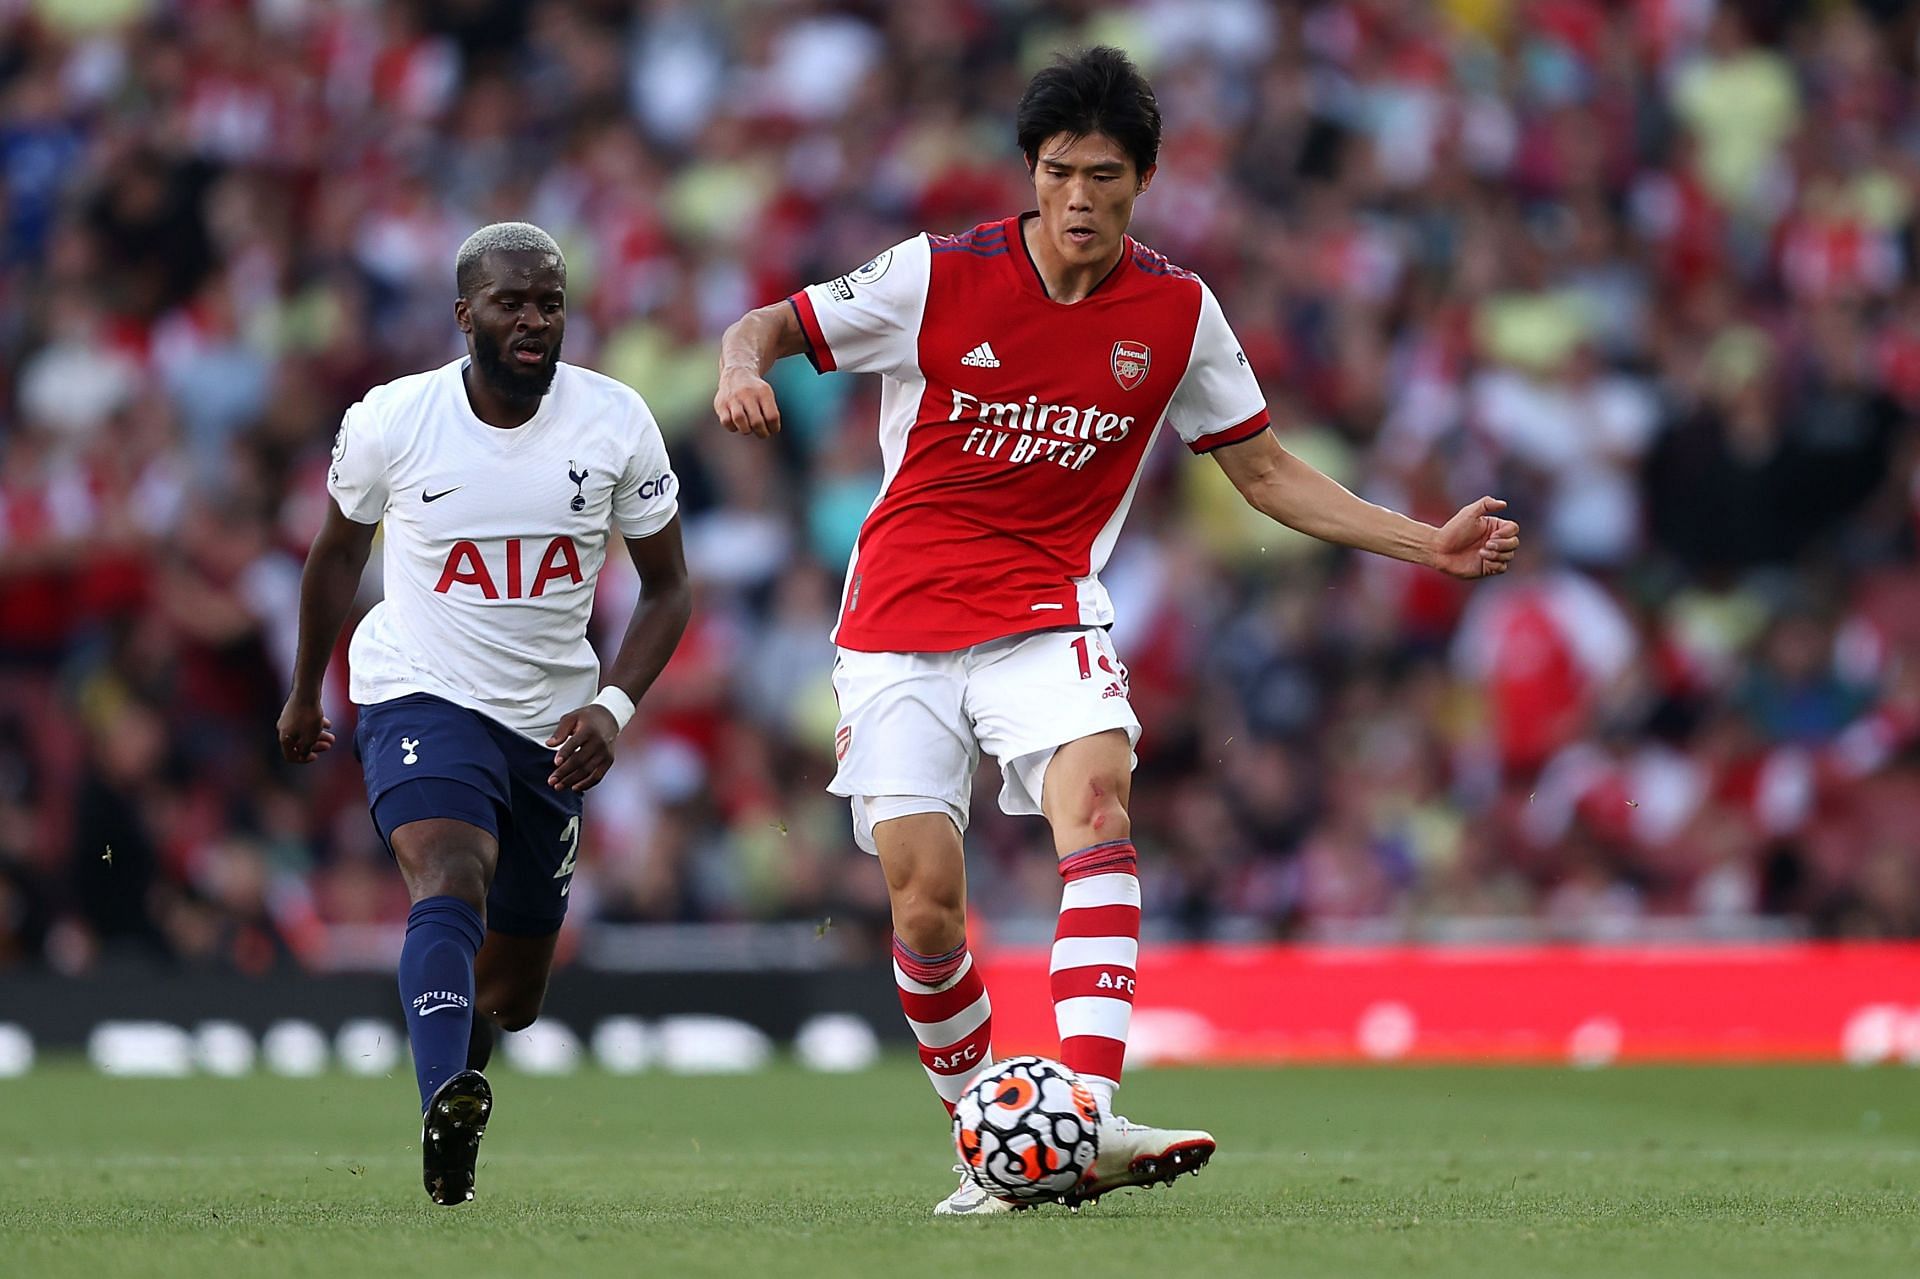 Tomiyasu has been a breath of fresh air at the Emirates